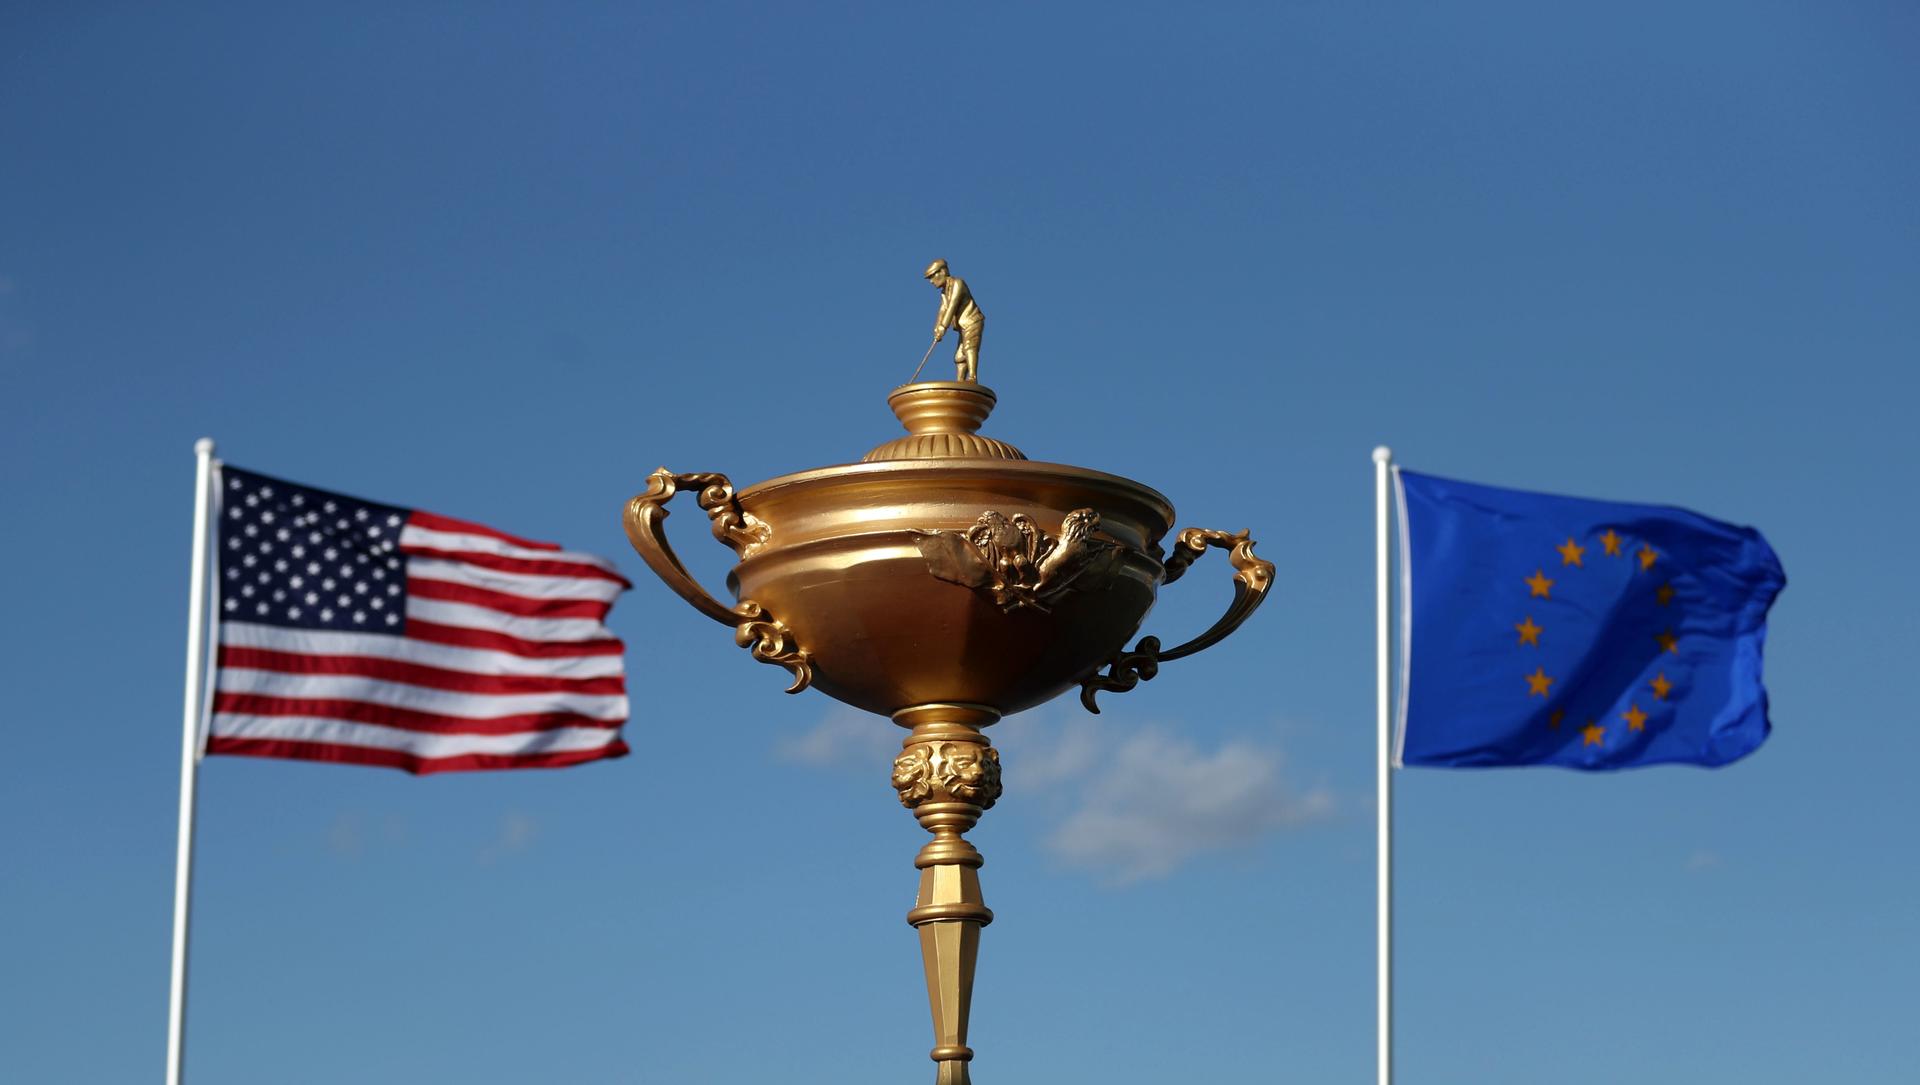 A giant version of the Ryder Cup trophy